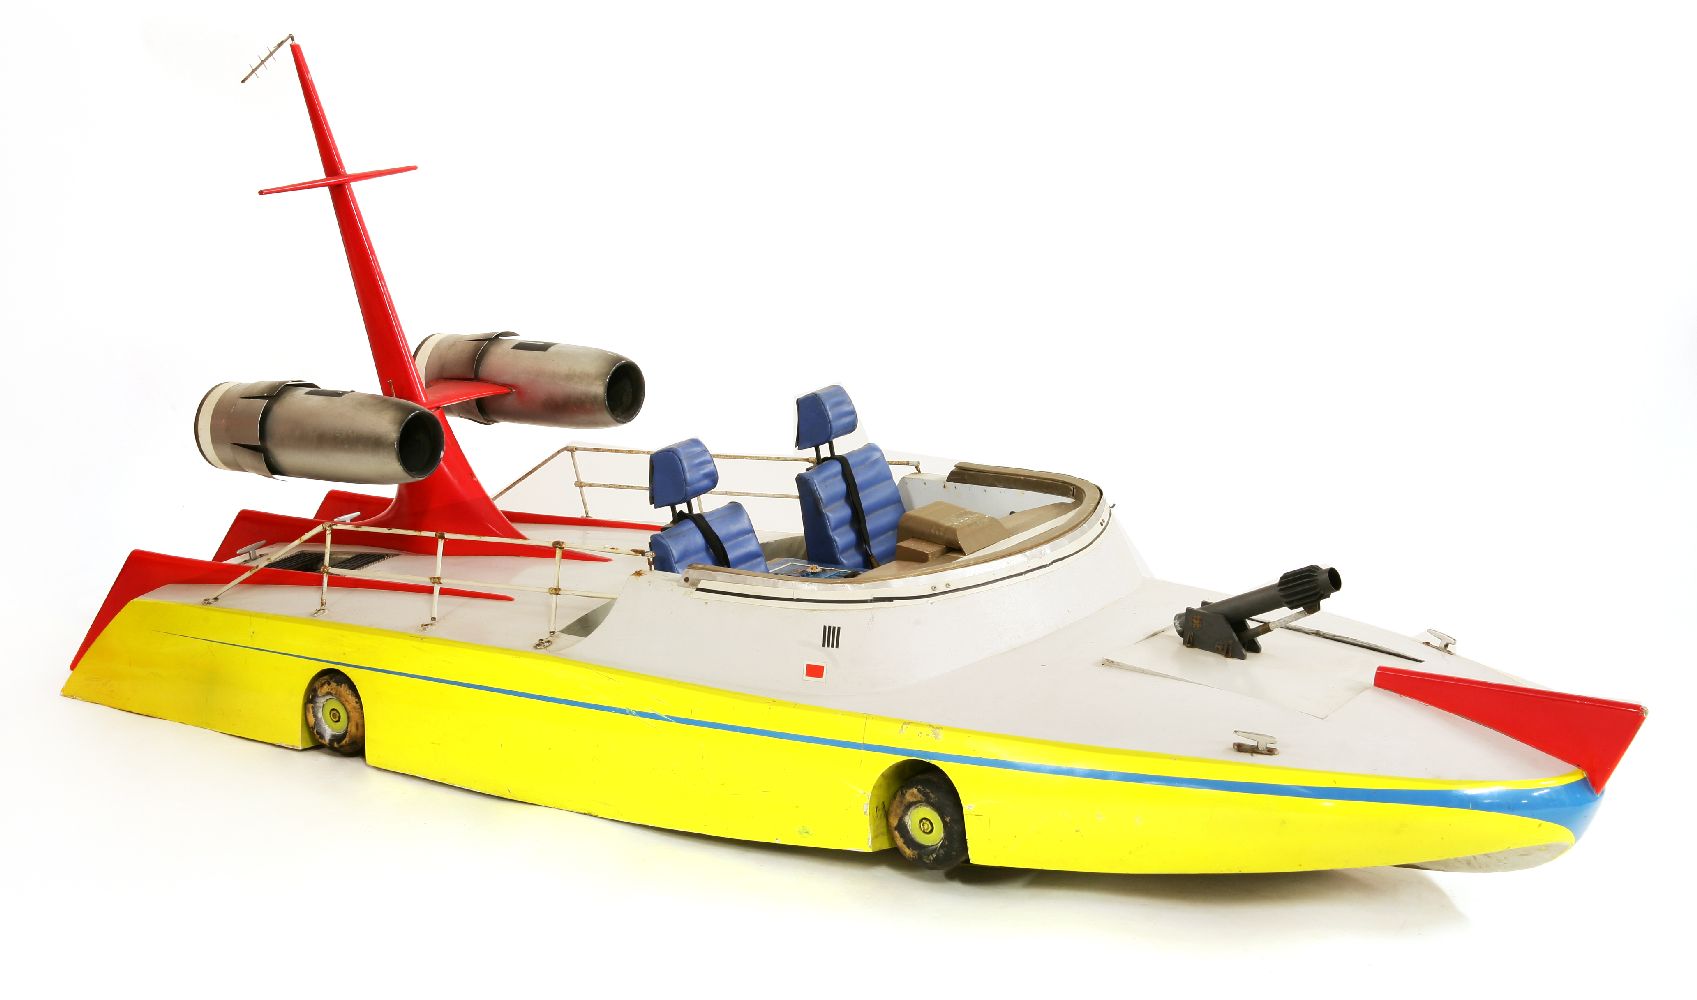 An original film prop for the 'The Investigator', a speed boat, designed by Reg Hill for Gerry